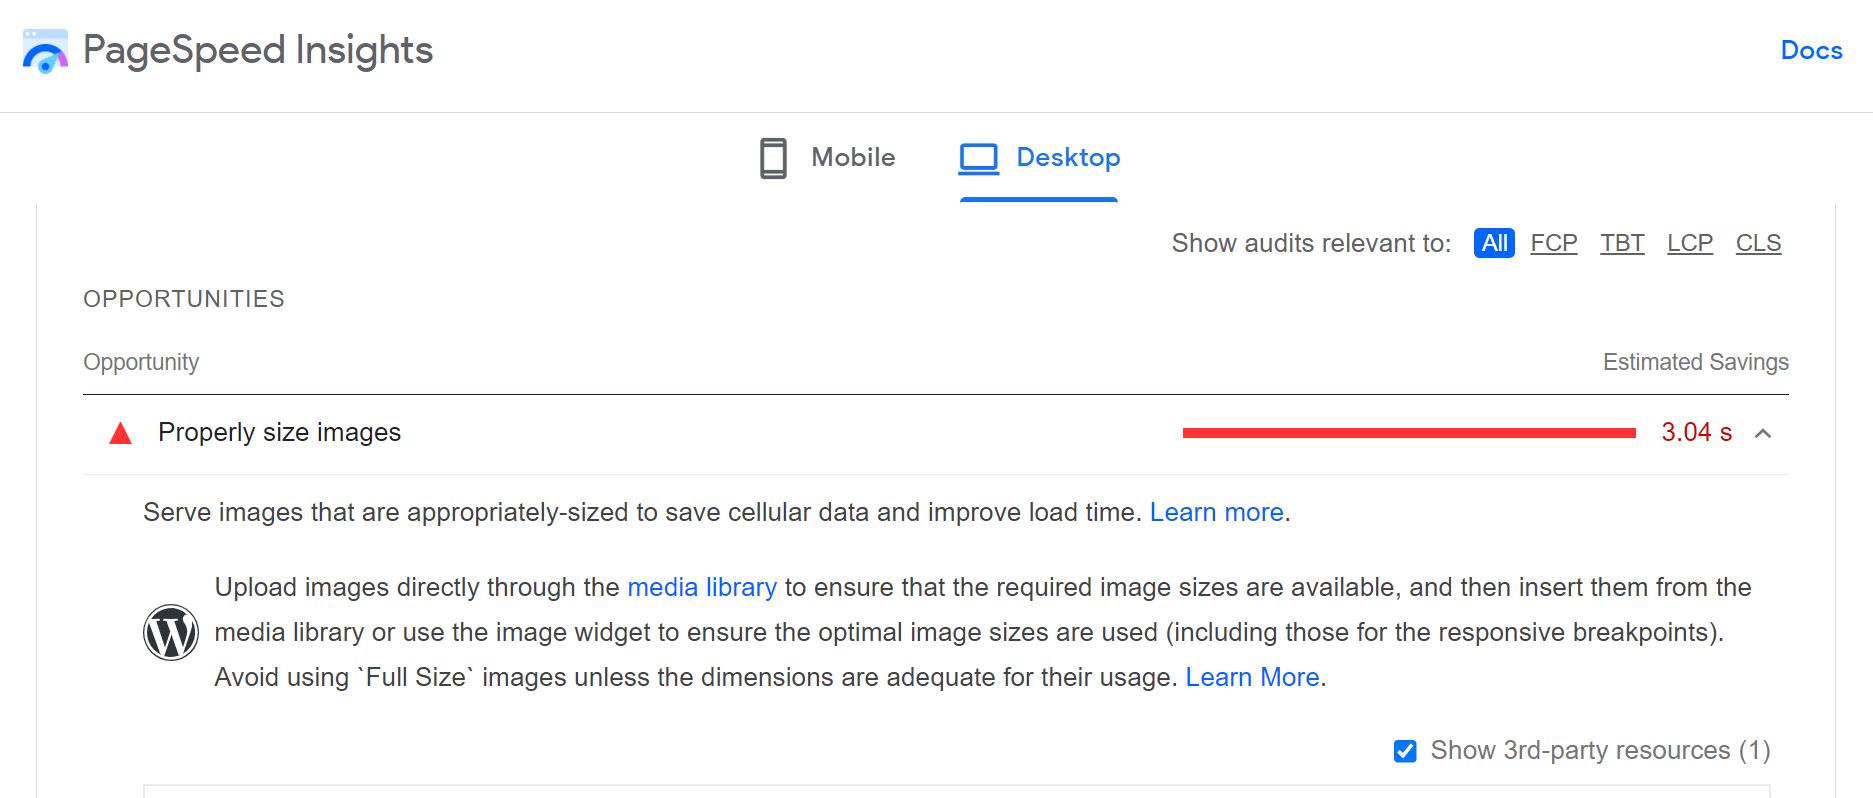 Image optimization suggestions in a PageSpeed Insights report